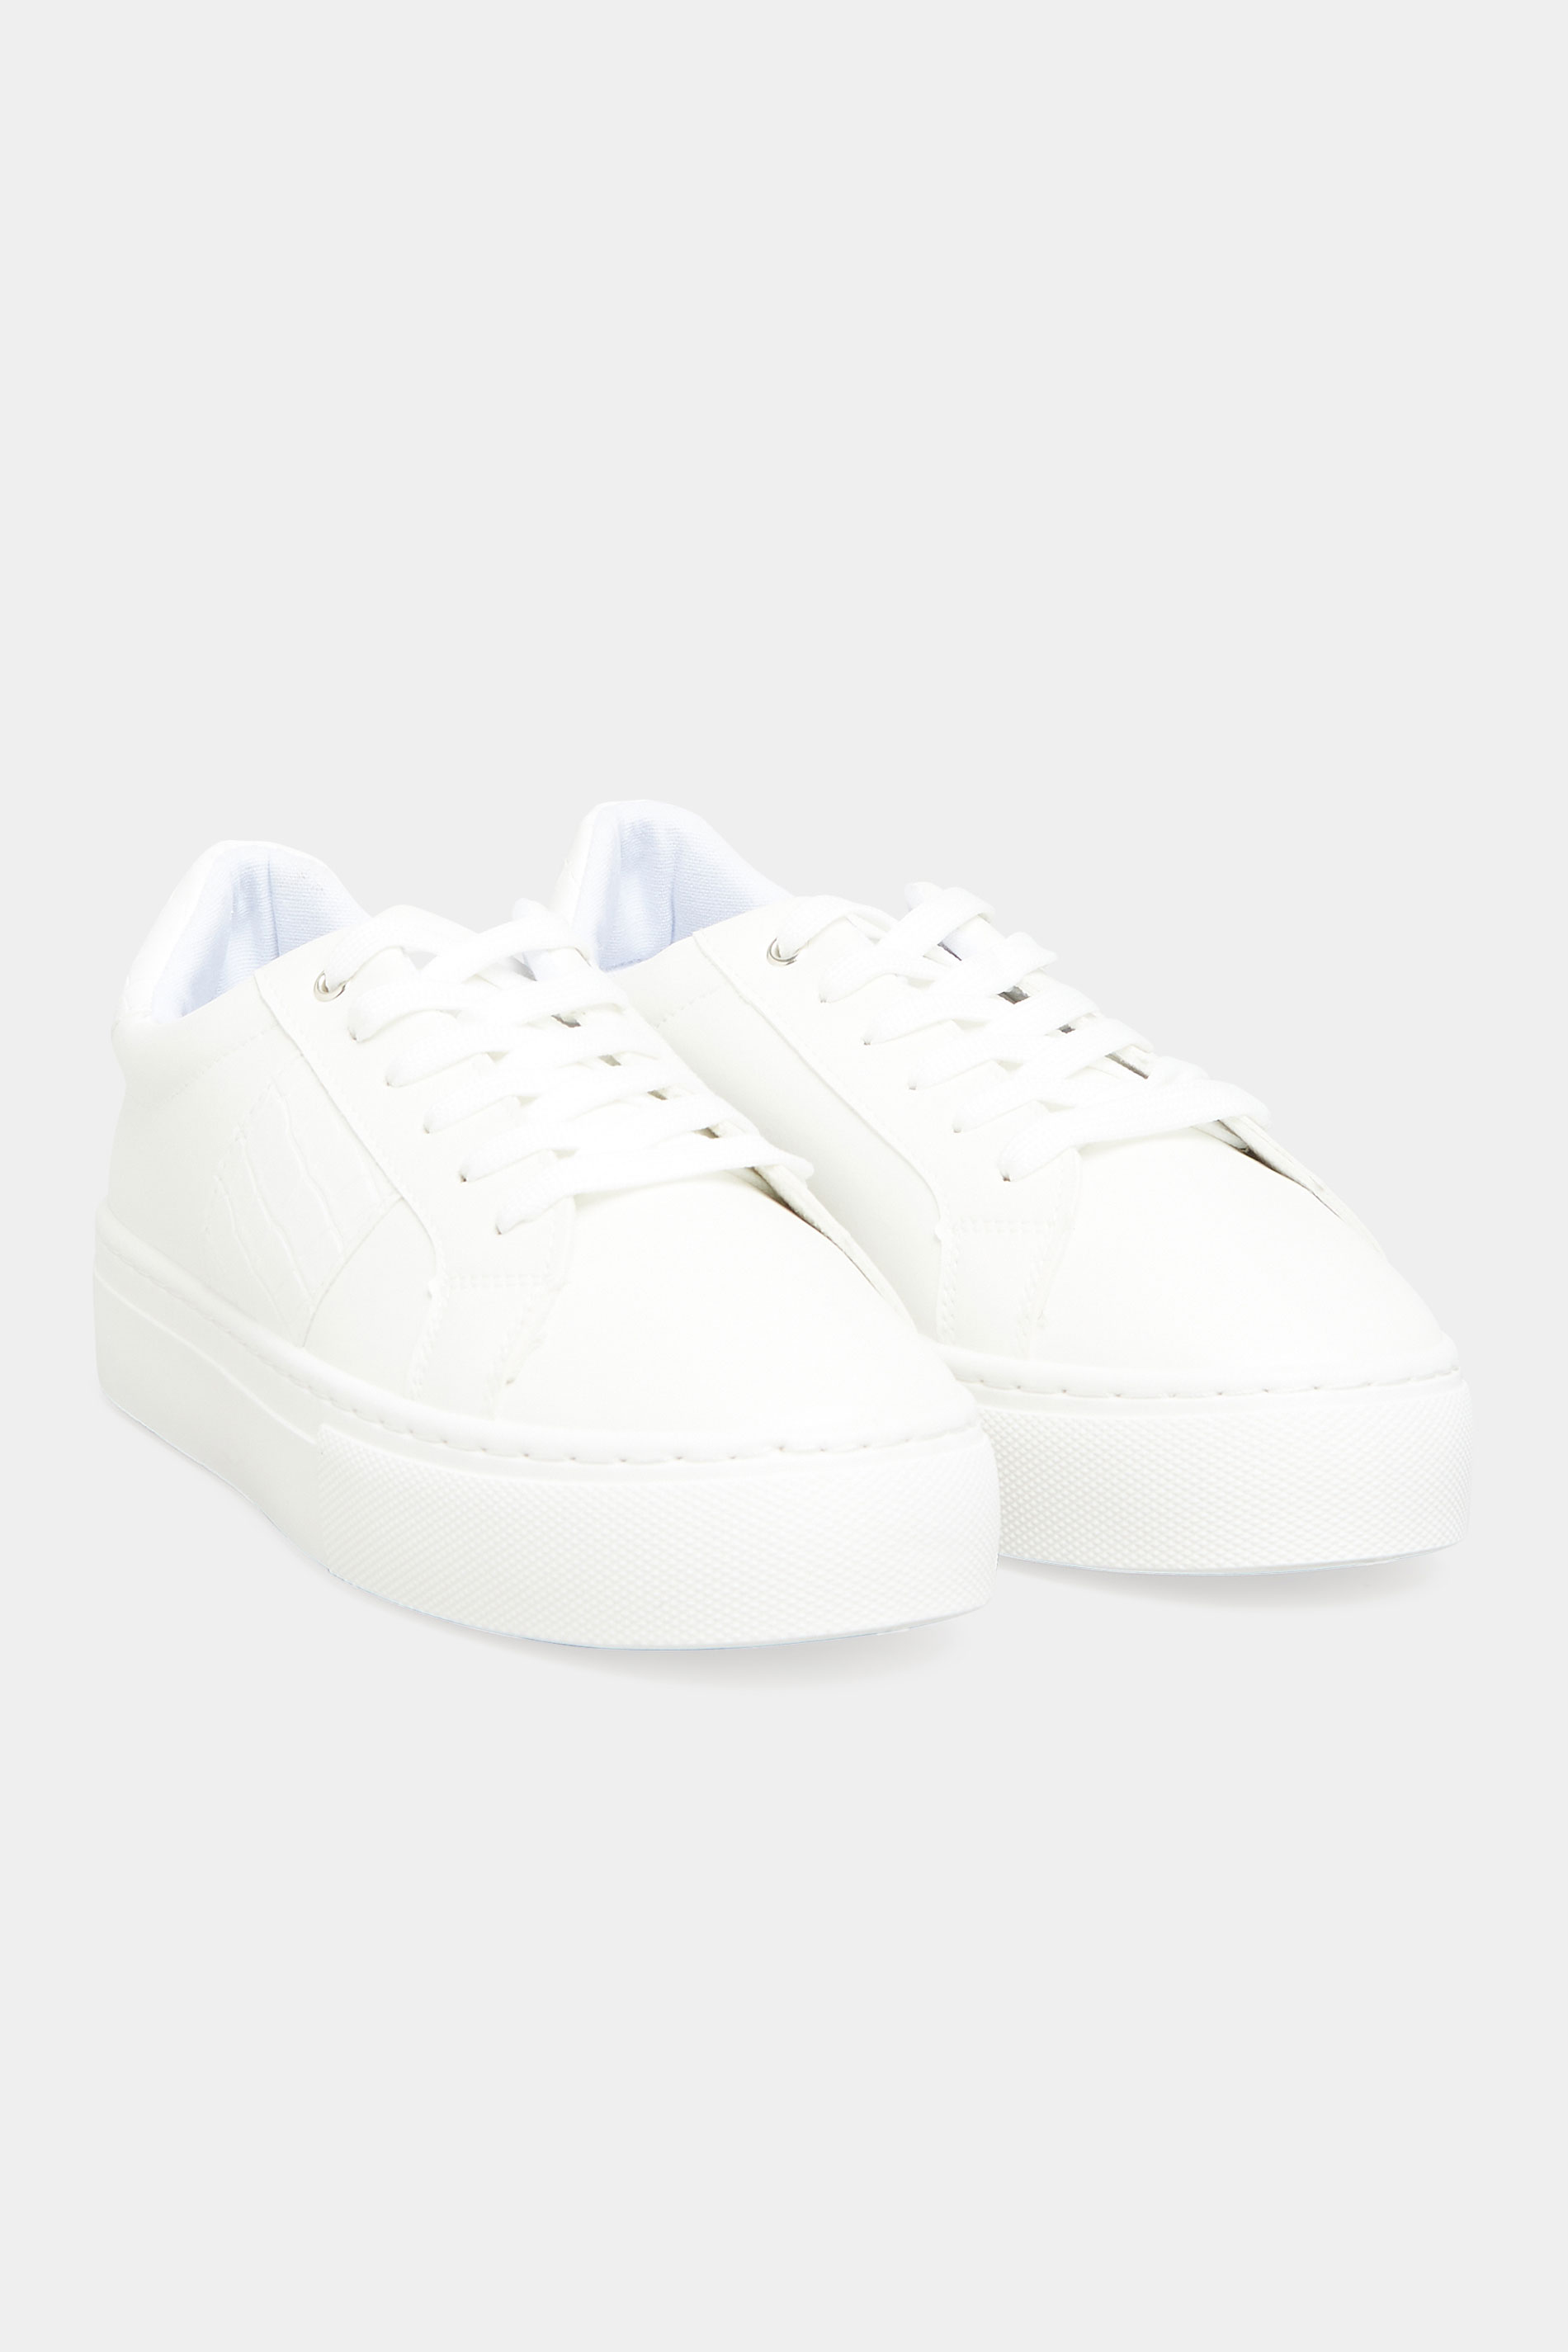 Chaussures Pieds Larges Tennis & Baskets Pieds Larges | Tennis Blanches Plateformes Pieds Extra Larges EEE - ET77724